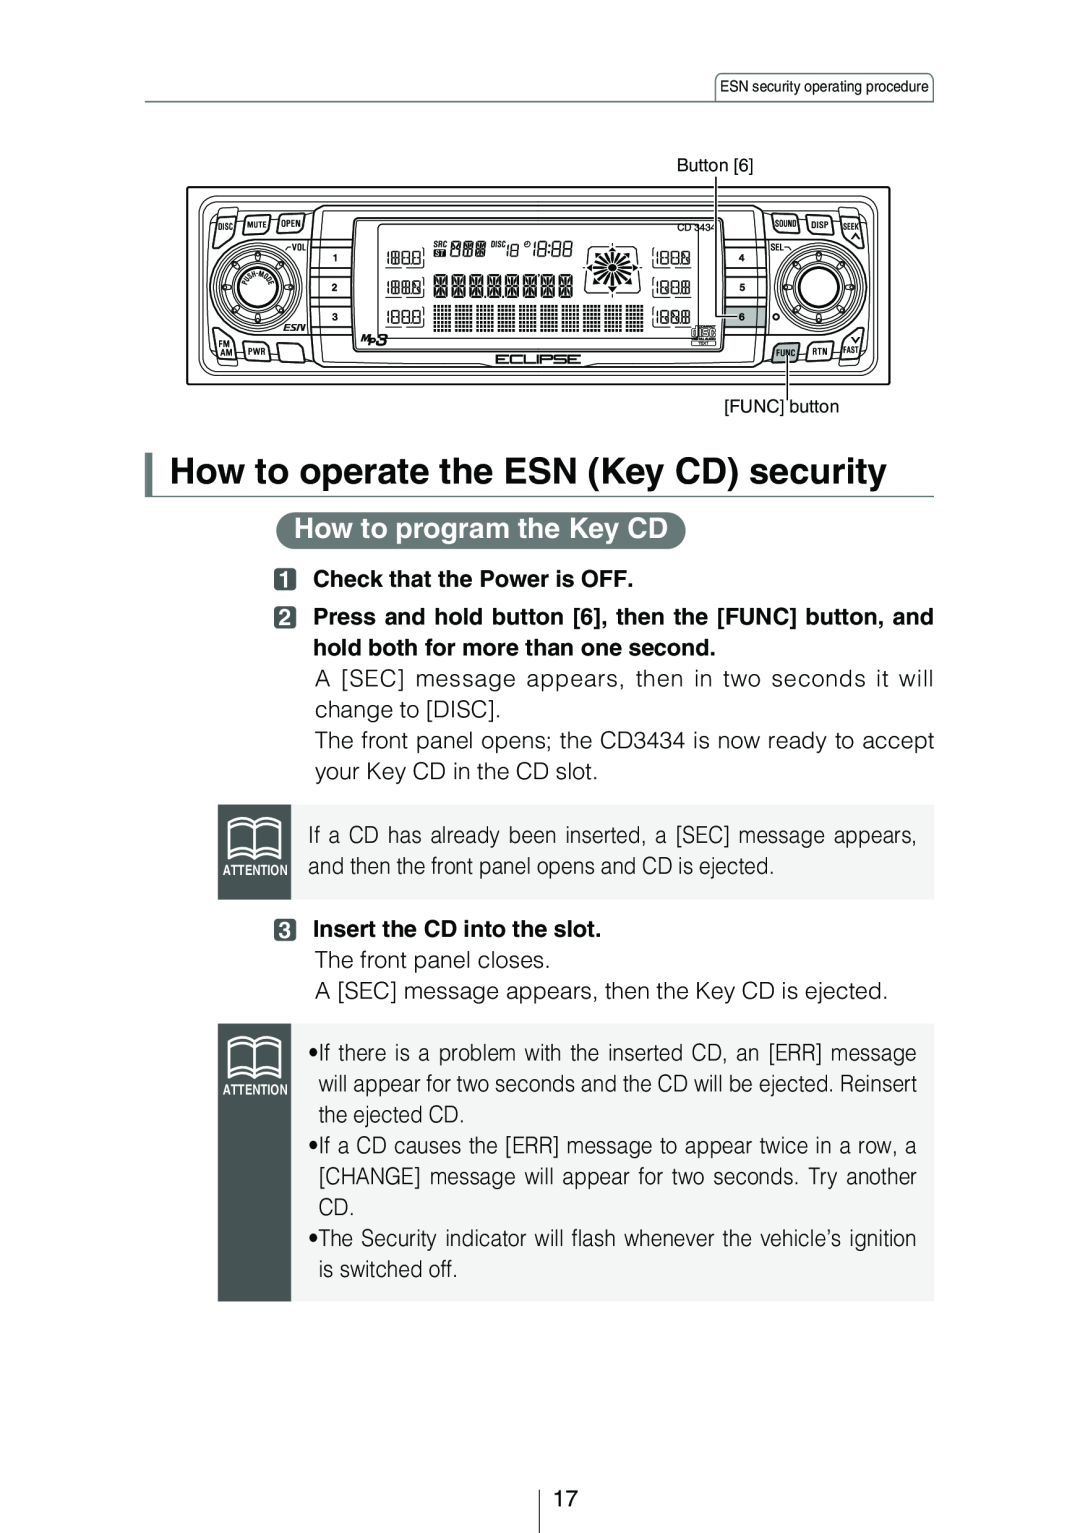 Eclipse - Fujitsu Ten CD3434 owner manual How to operate the ESN Key CD security, How to program the Key CD 